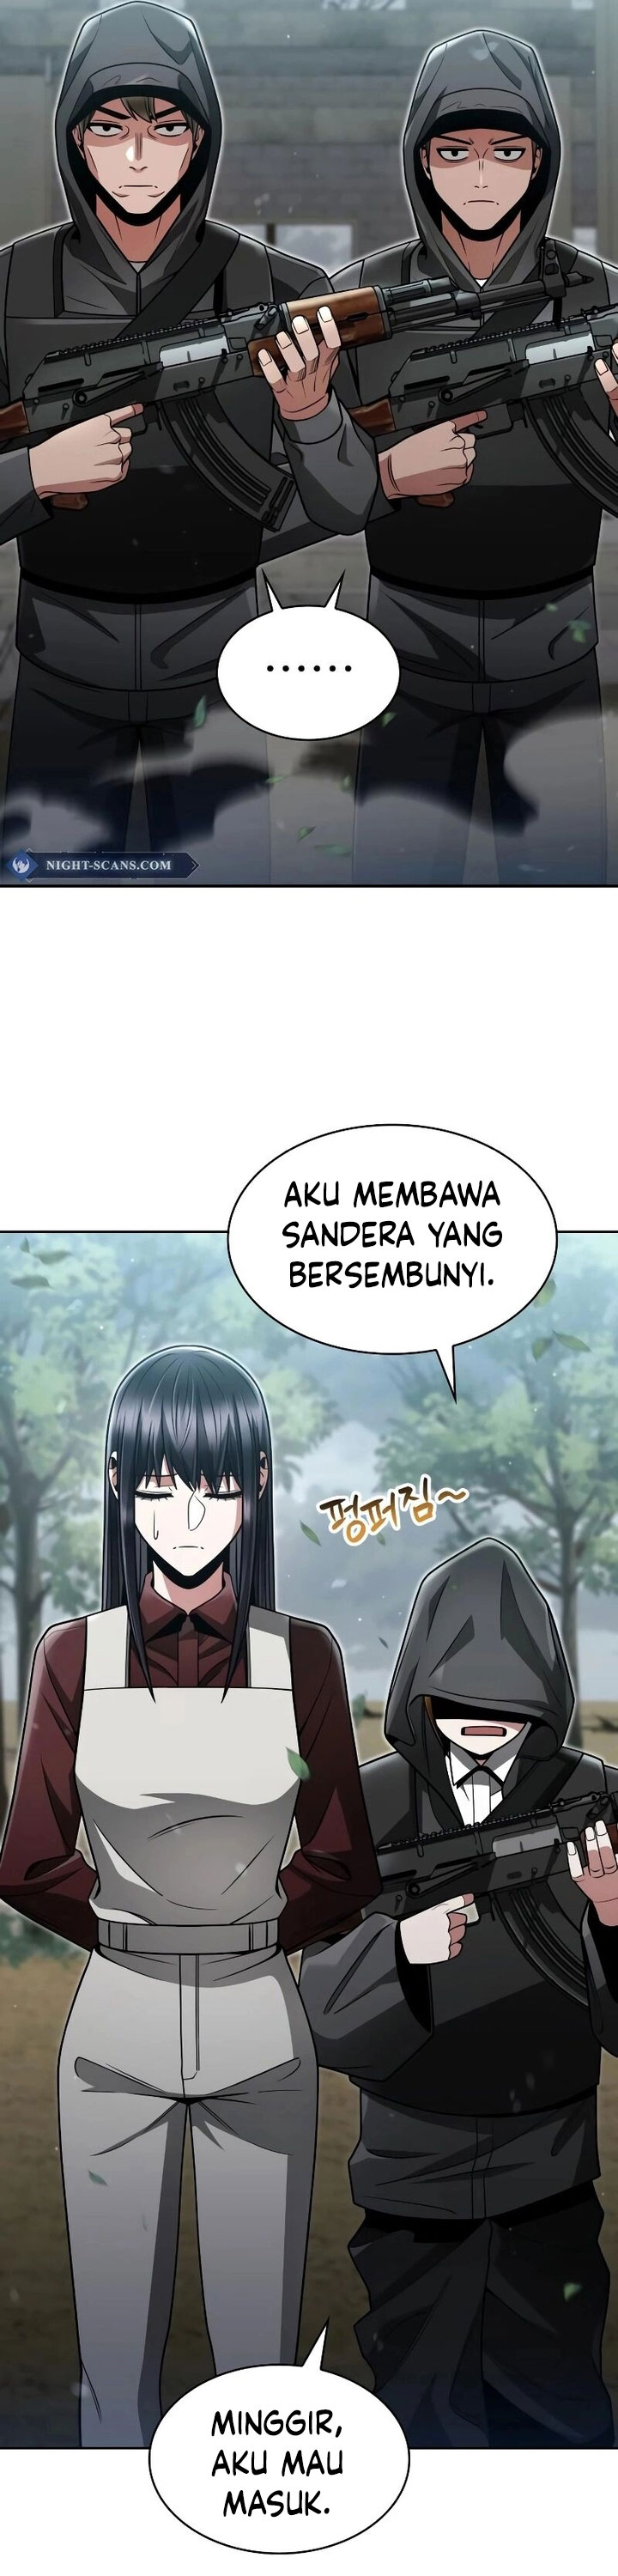 Dilarang COPAS - situs resmi www.mangacanblog.com - Komik clever cleaning life of the returned genius hunter 065 - chapter 65 66 Indonesia clever cleaning life of the returned genius hunter 065 - chapter 65 Terbaru 21|Baca Manga Komik Indonesia|Mangacan